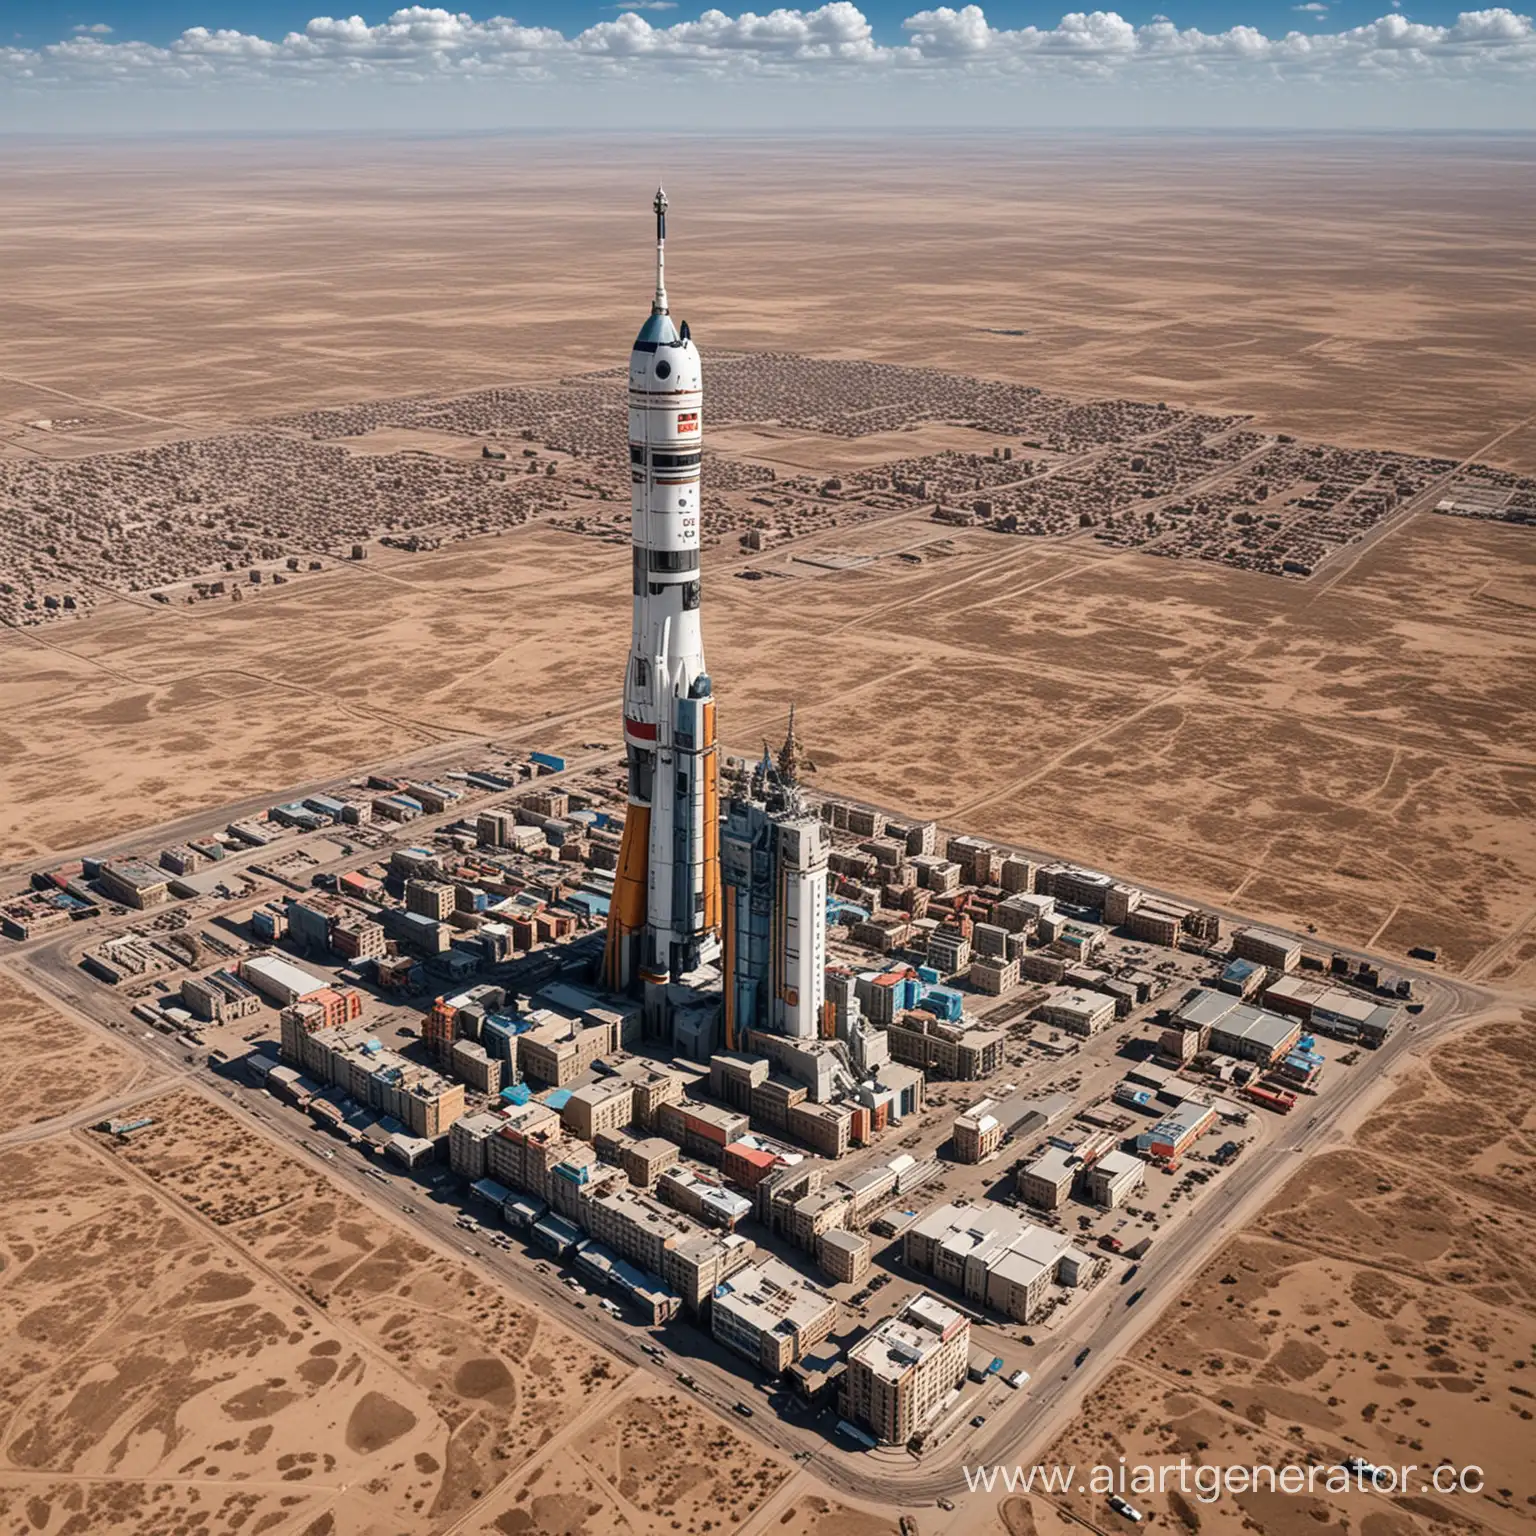 the city of Baikonur in the future
